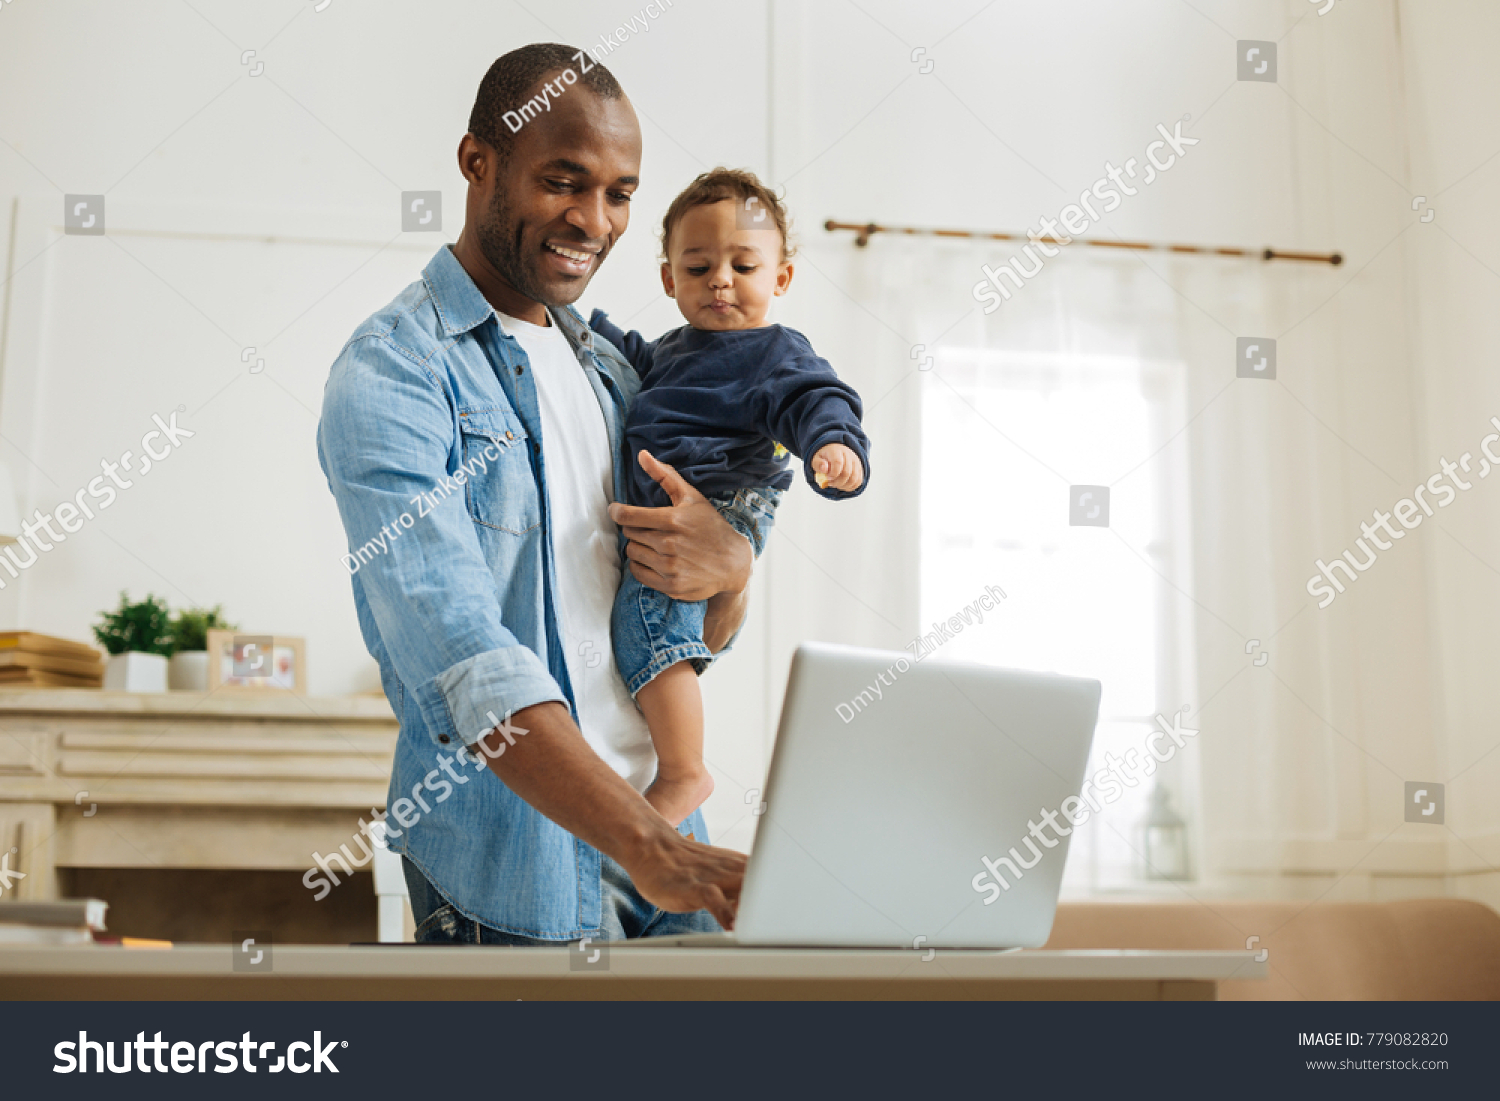 Typing. Attractive alert young afro-american father holding his little son and typing on the laptop while standing at the table and a fireplace in the background #779082820